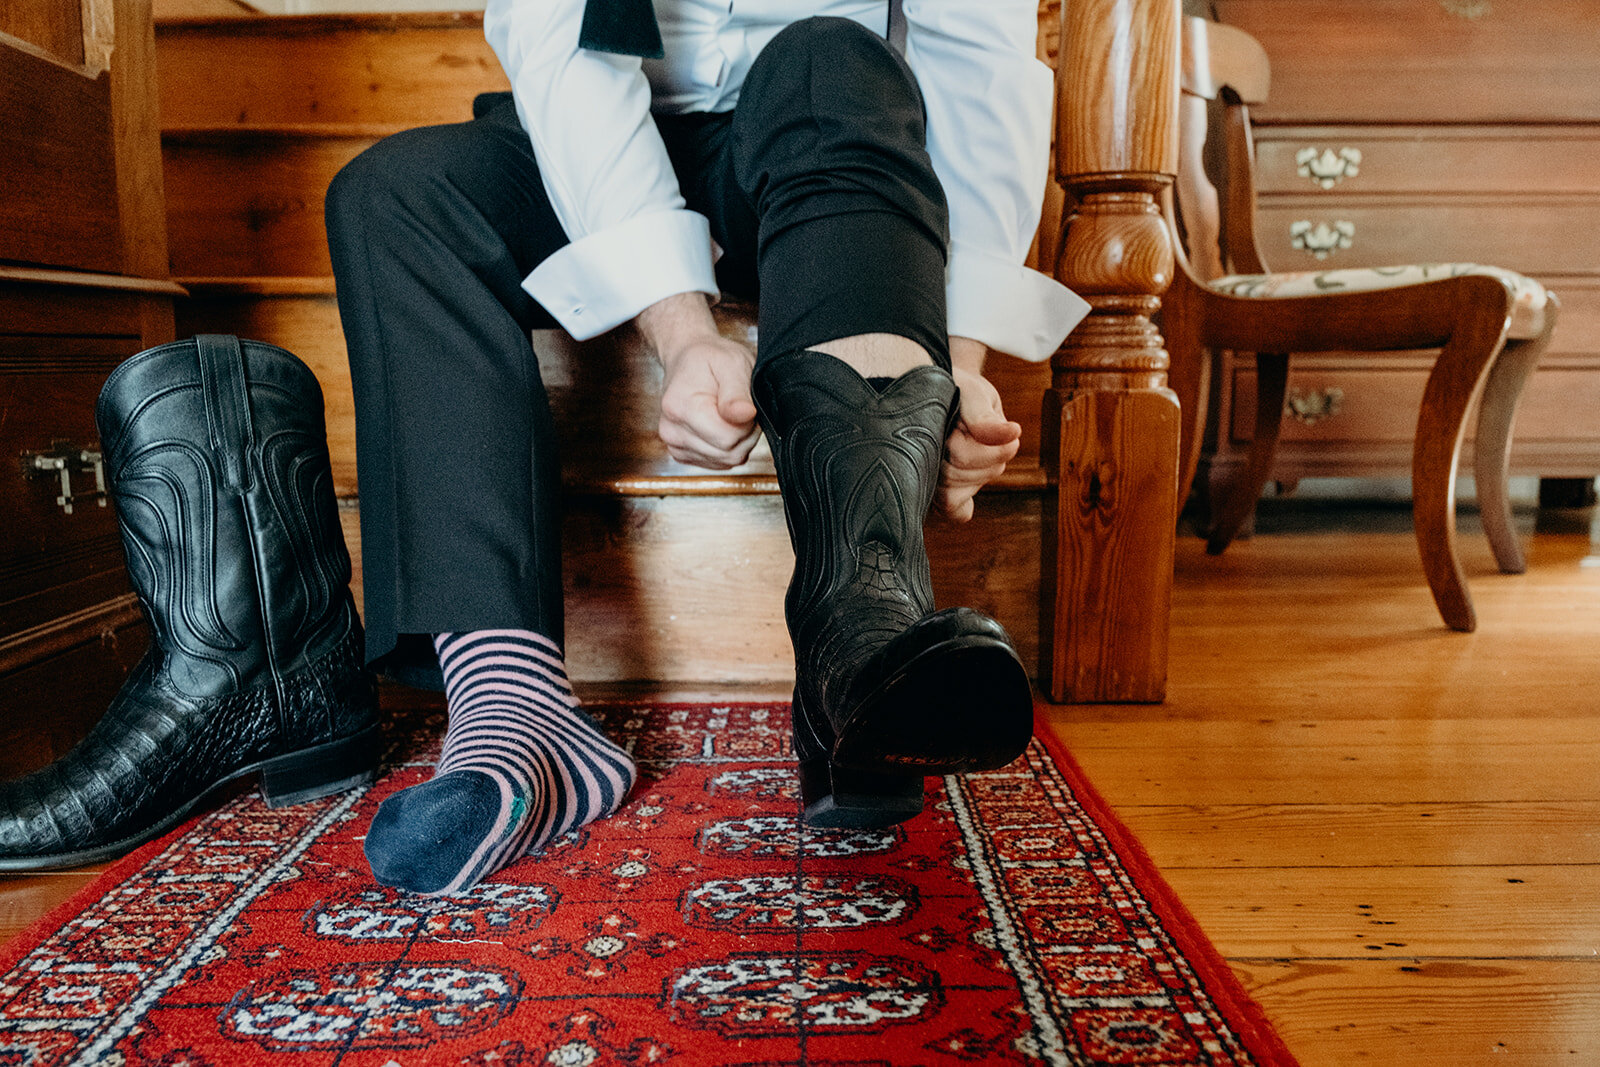 The groom puts on his black cowboy boots in an old farmhouse before his outdoor wedding ceremony.